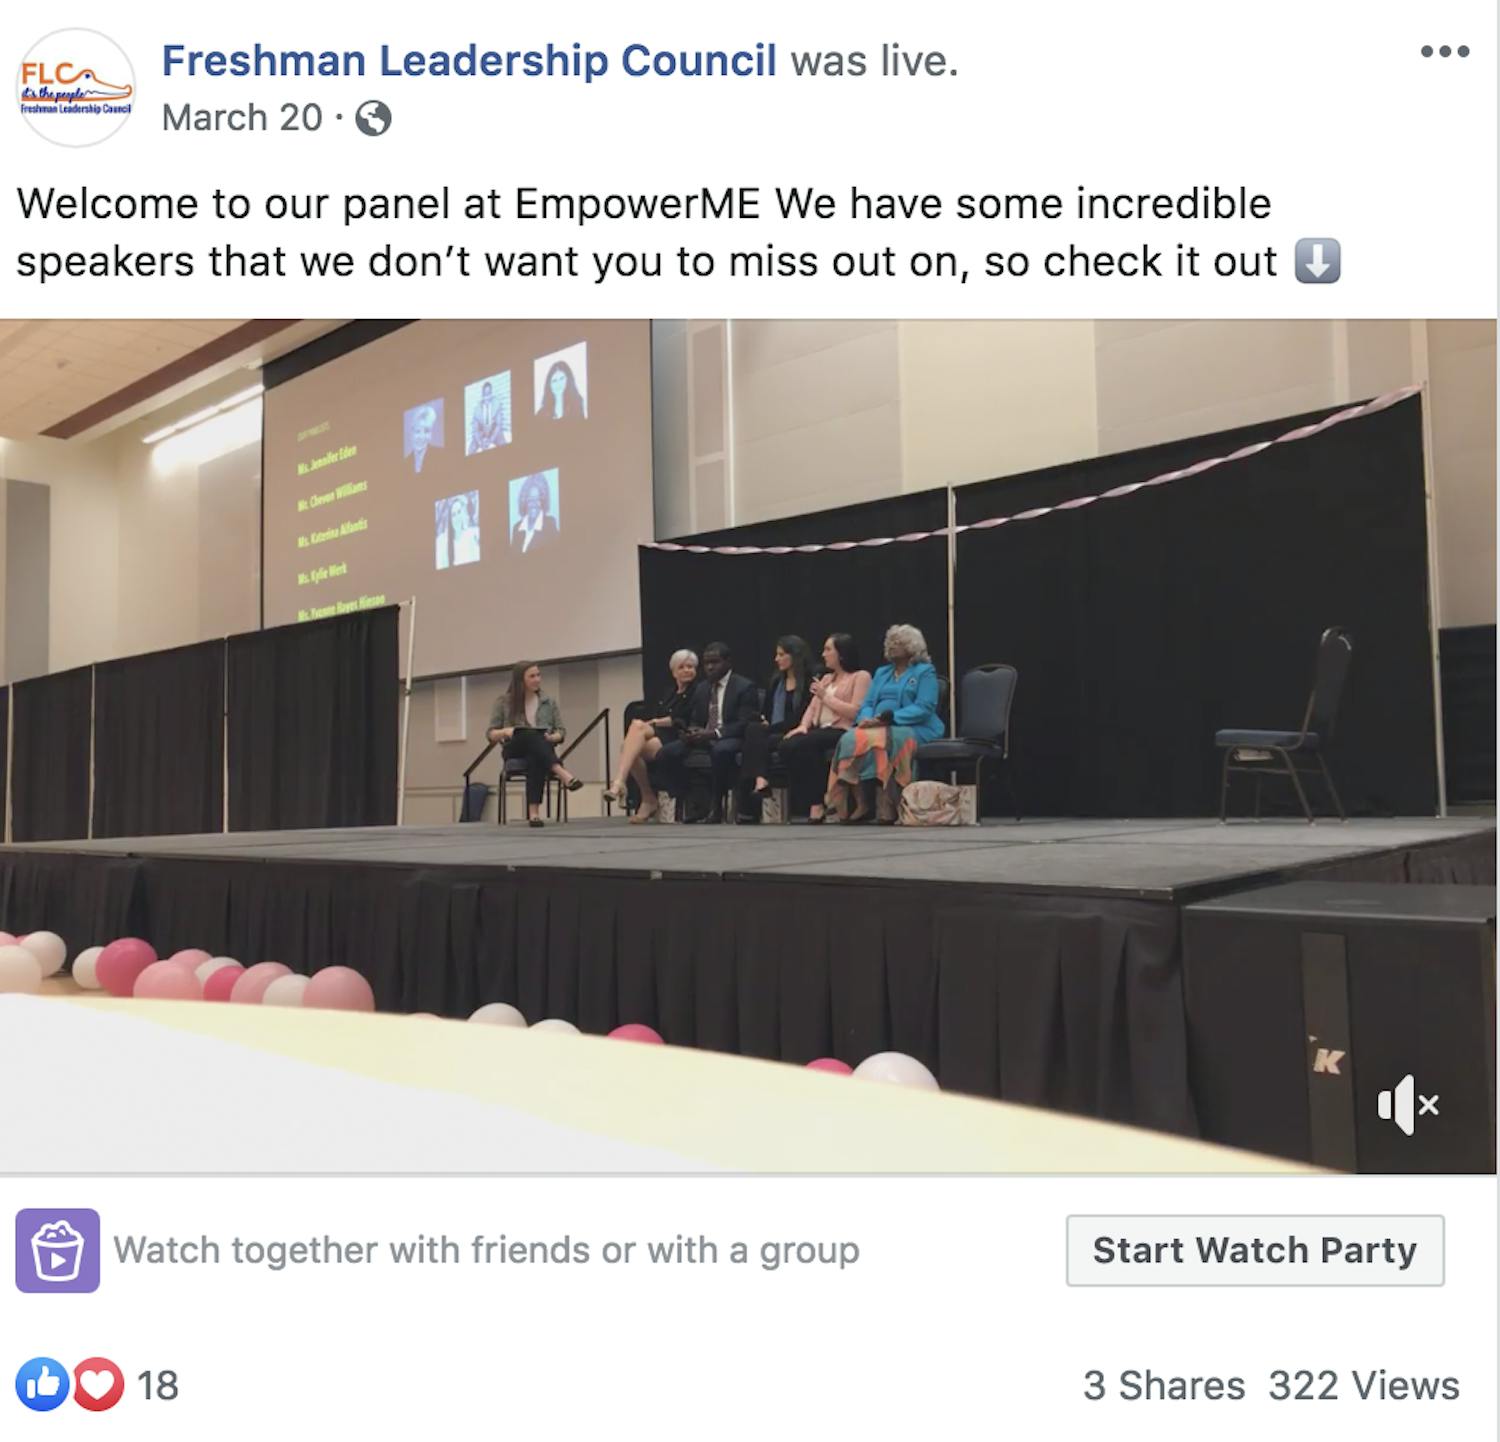 FLC's last Facebook post from March 2019.&nbsp;